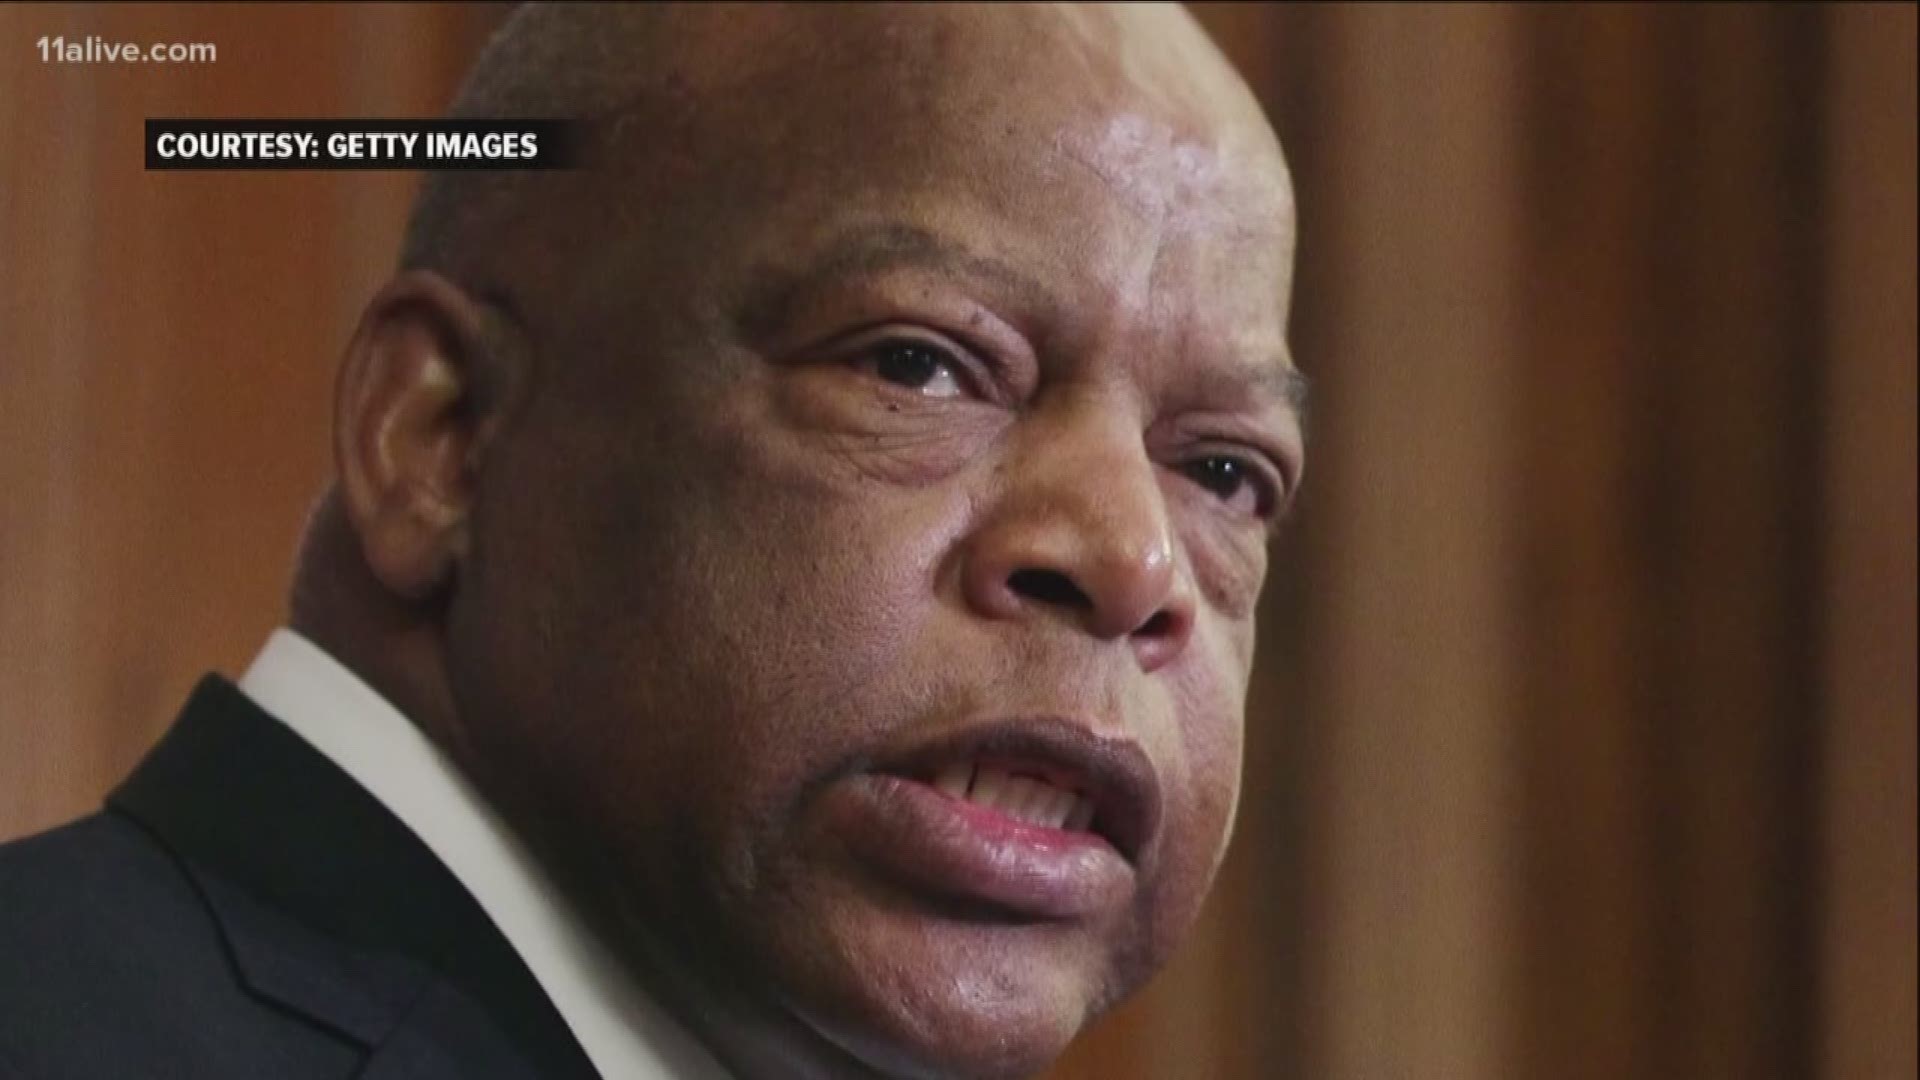 Civil rights leader and U.S. Congressman John Lewis has been tapped to introduce one of the eight Best Picture nominees during the Academy Awards this Sunday.